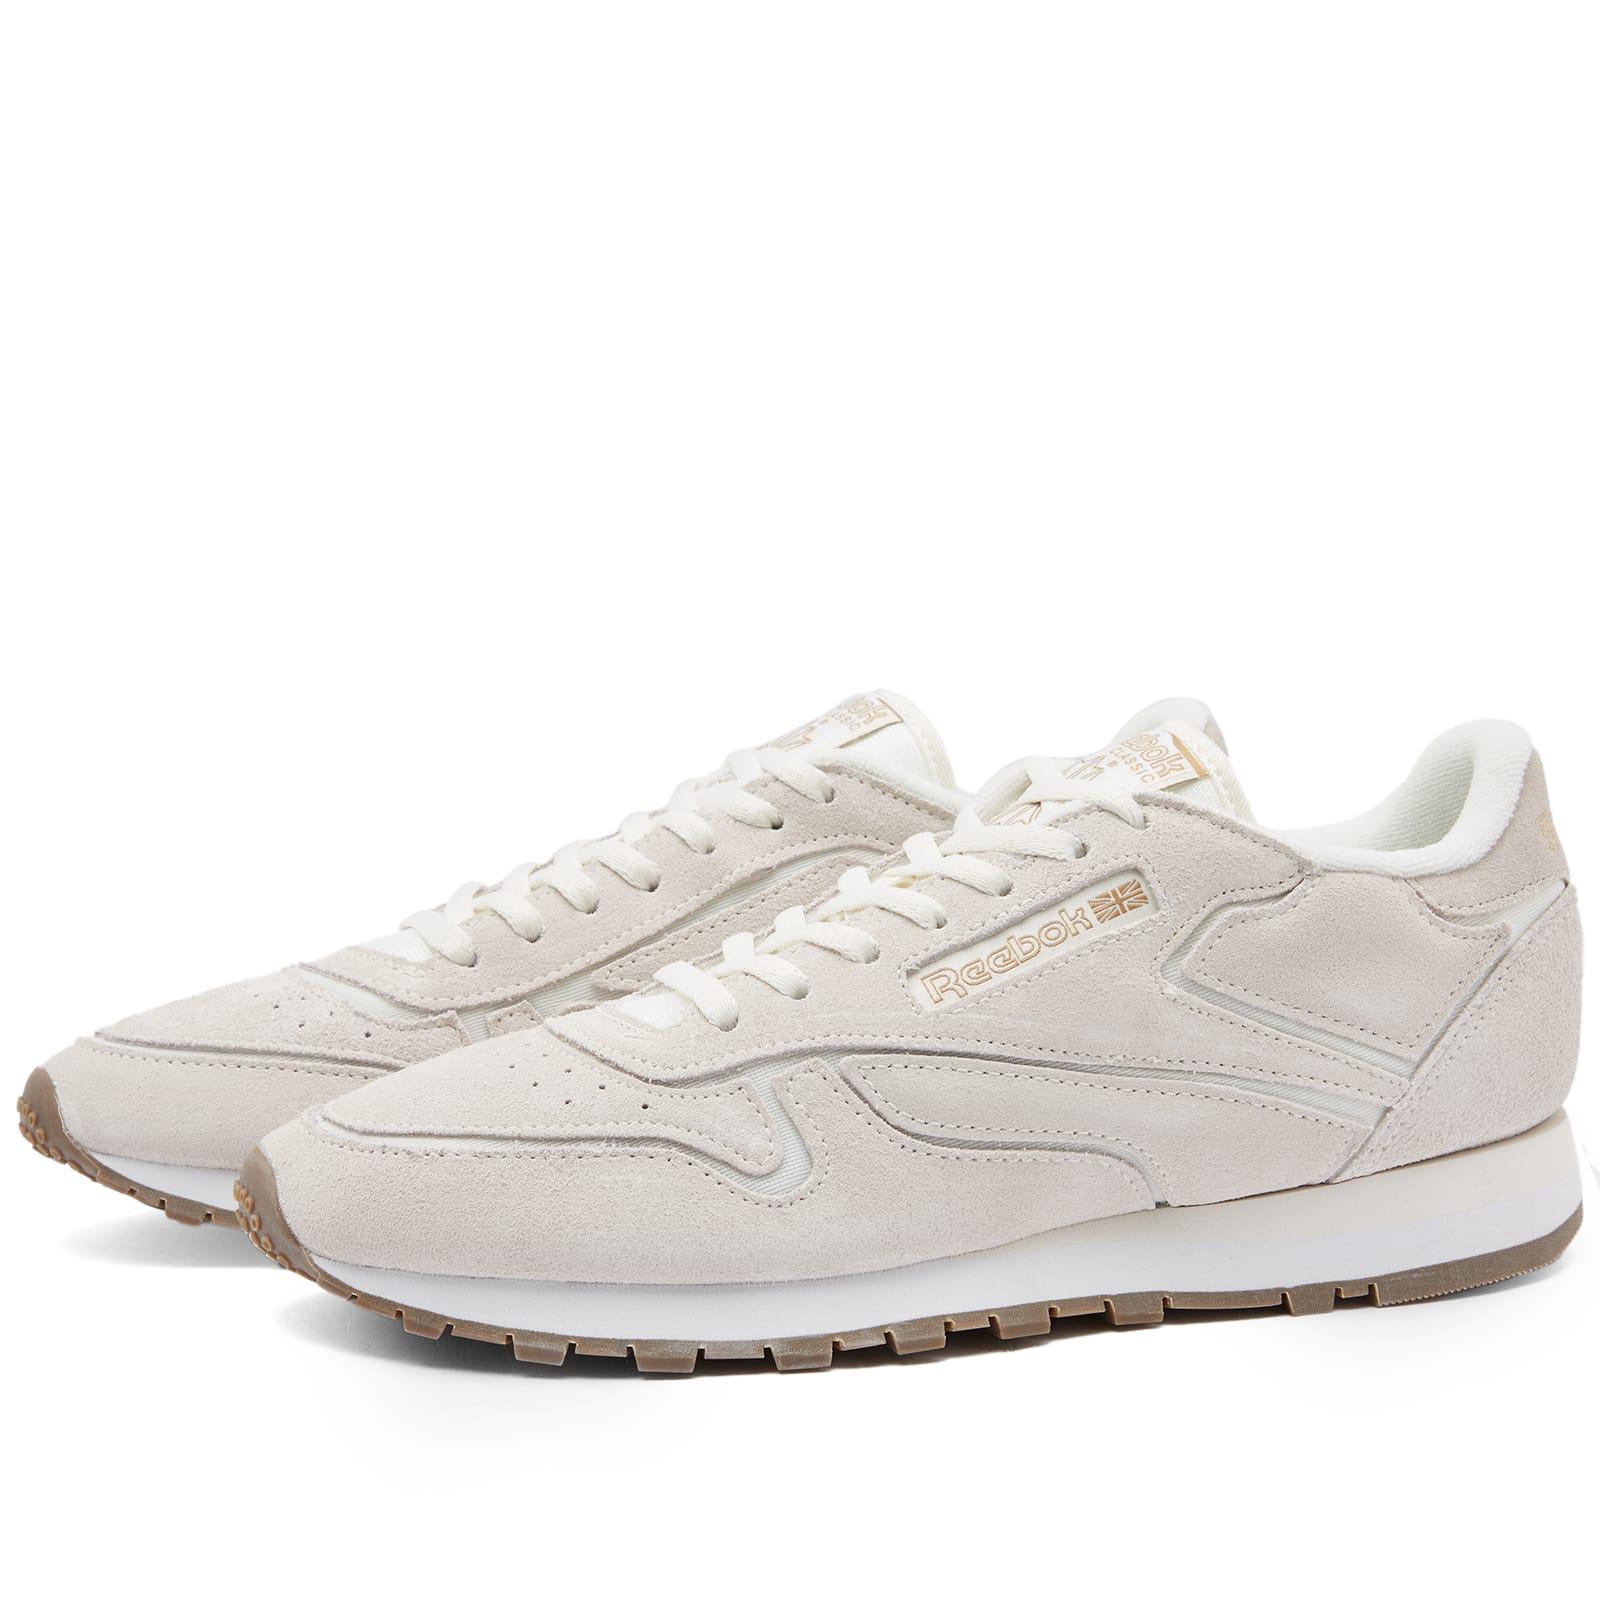 Reebok Classic Leather Sneakers in White | Lyst